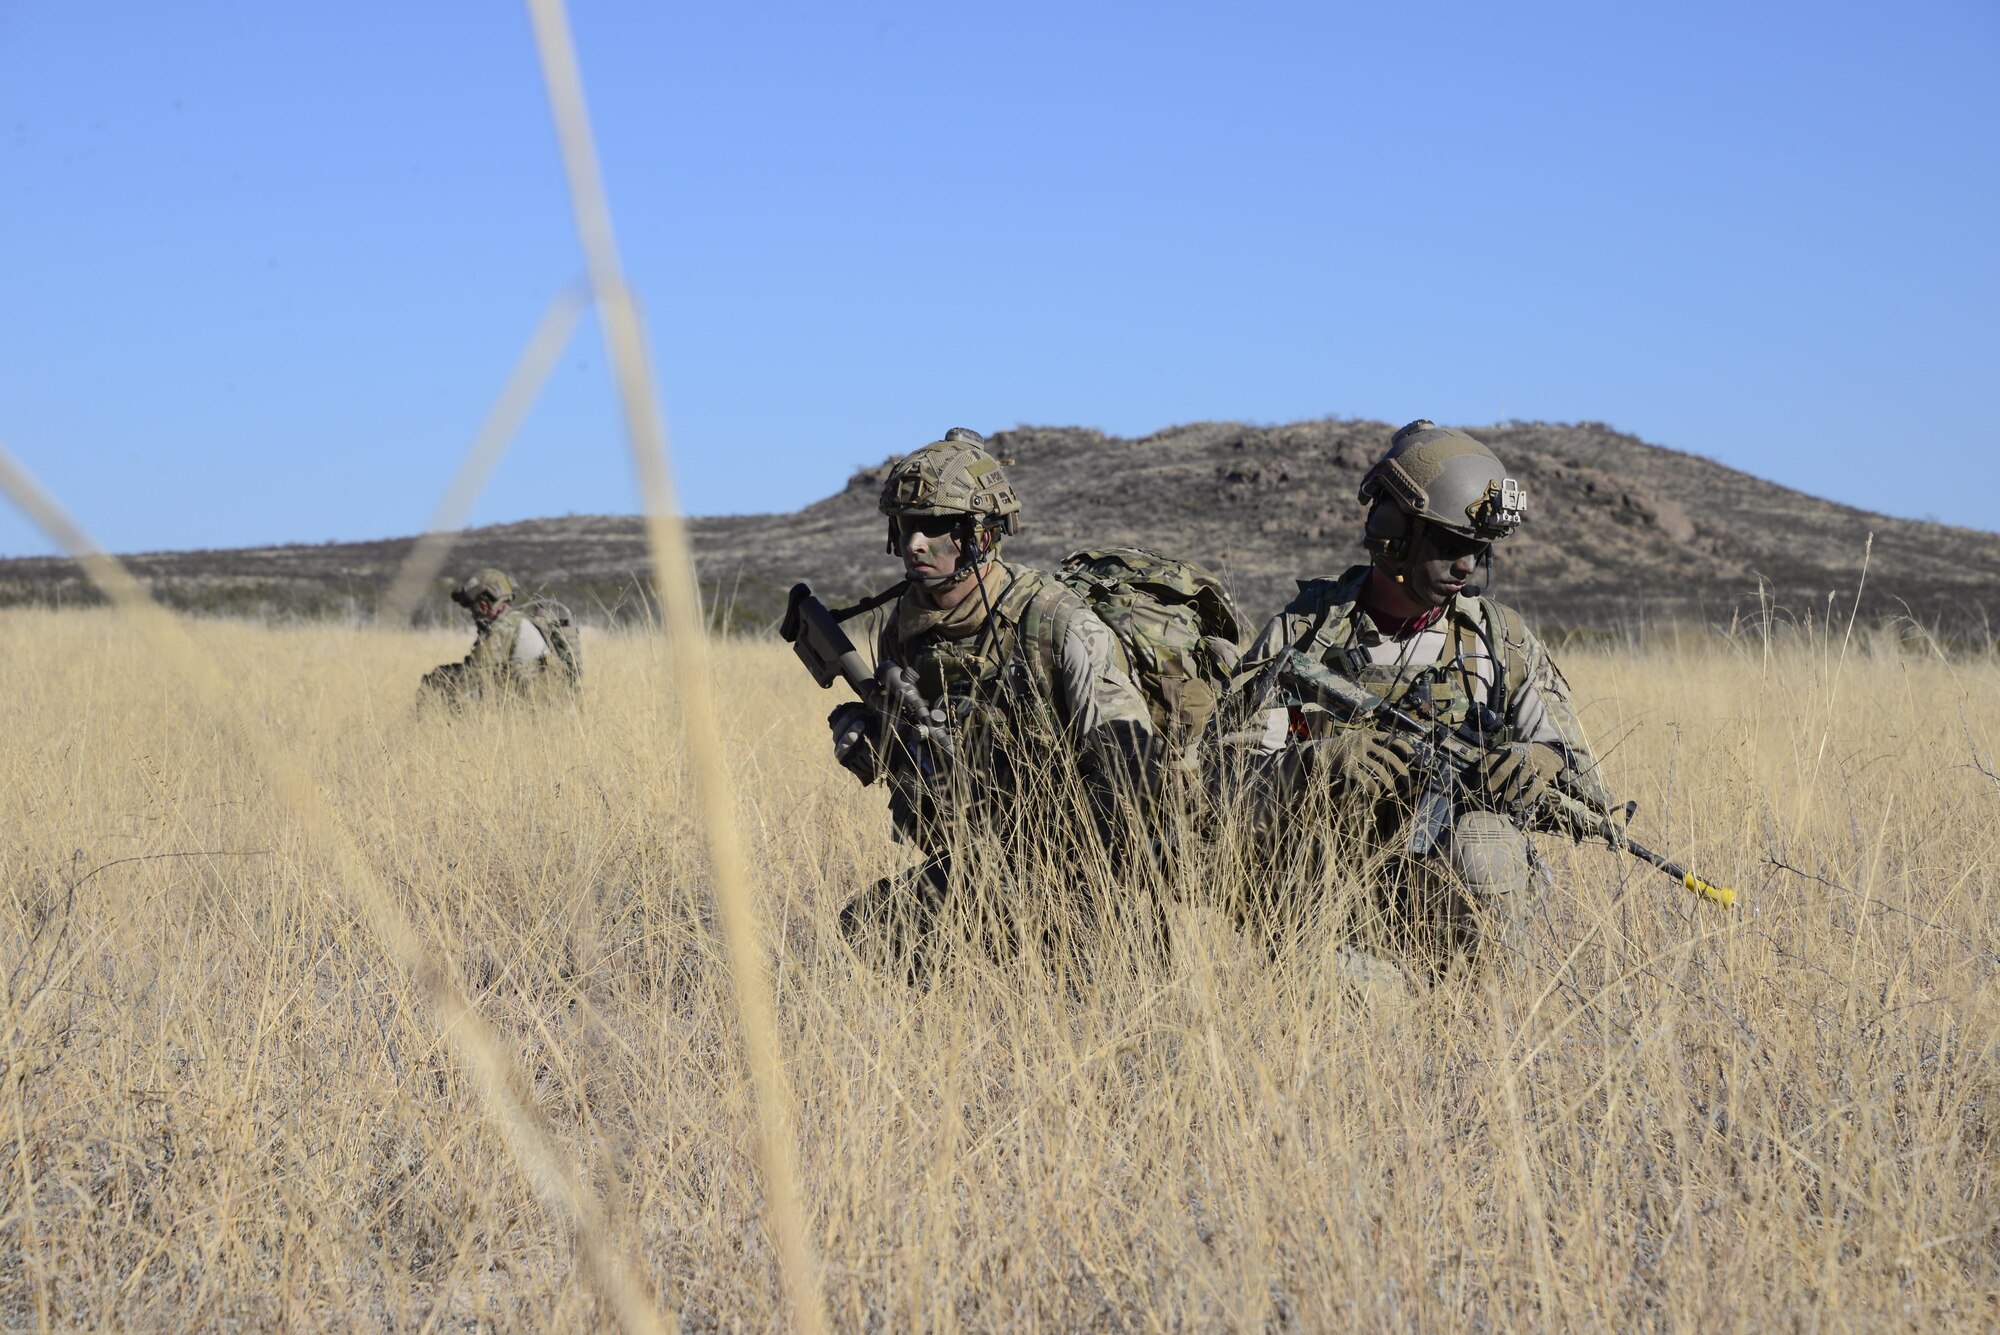 U.S. Air Force pararescuemen assigned to the 48th Rescue Squadron secure a drop zone during a mass casualty exercise at Fort Huachuca, Ariz., Dec. 8, 2016. During the exercise, pararescuemen were expected to triage, treat and evacuate casualties, and to eliminate any presence of simulated opposing forces. (U.S. Air Force photo by Senior Airman Betty R. Chevalier)